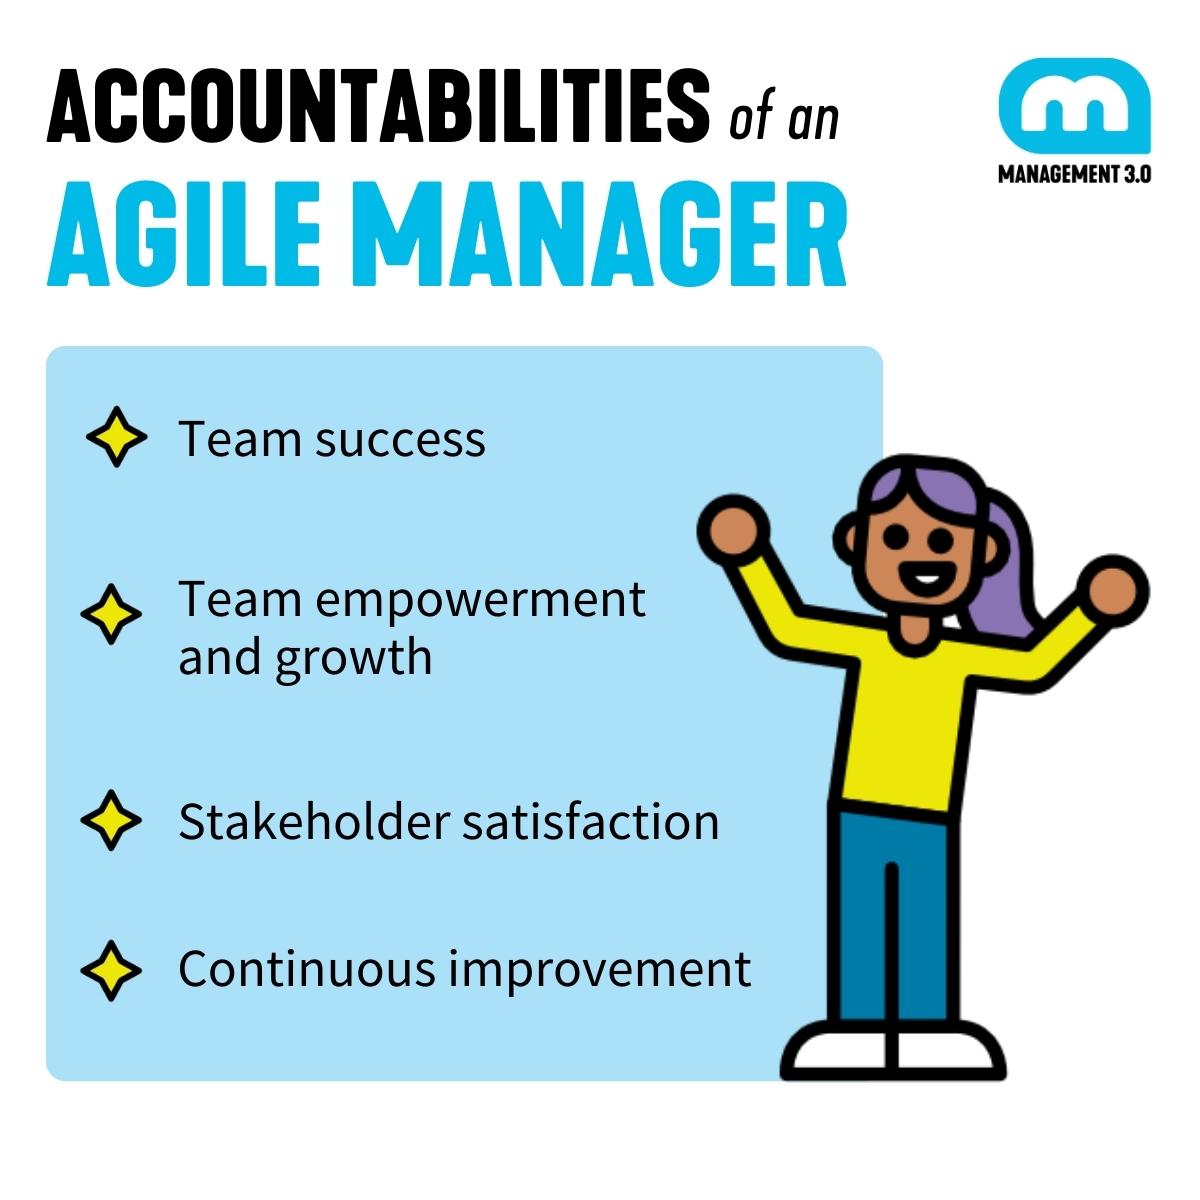 Accountabilities of an Agile Manager